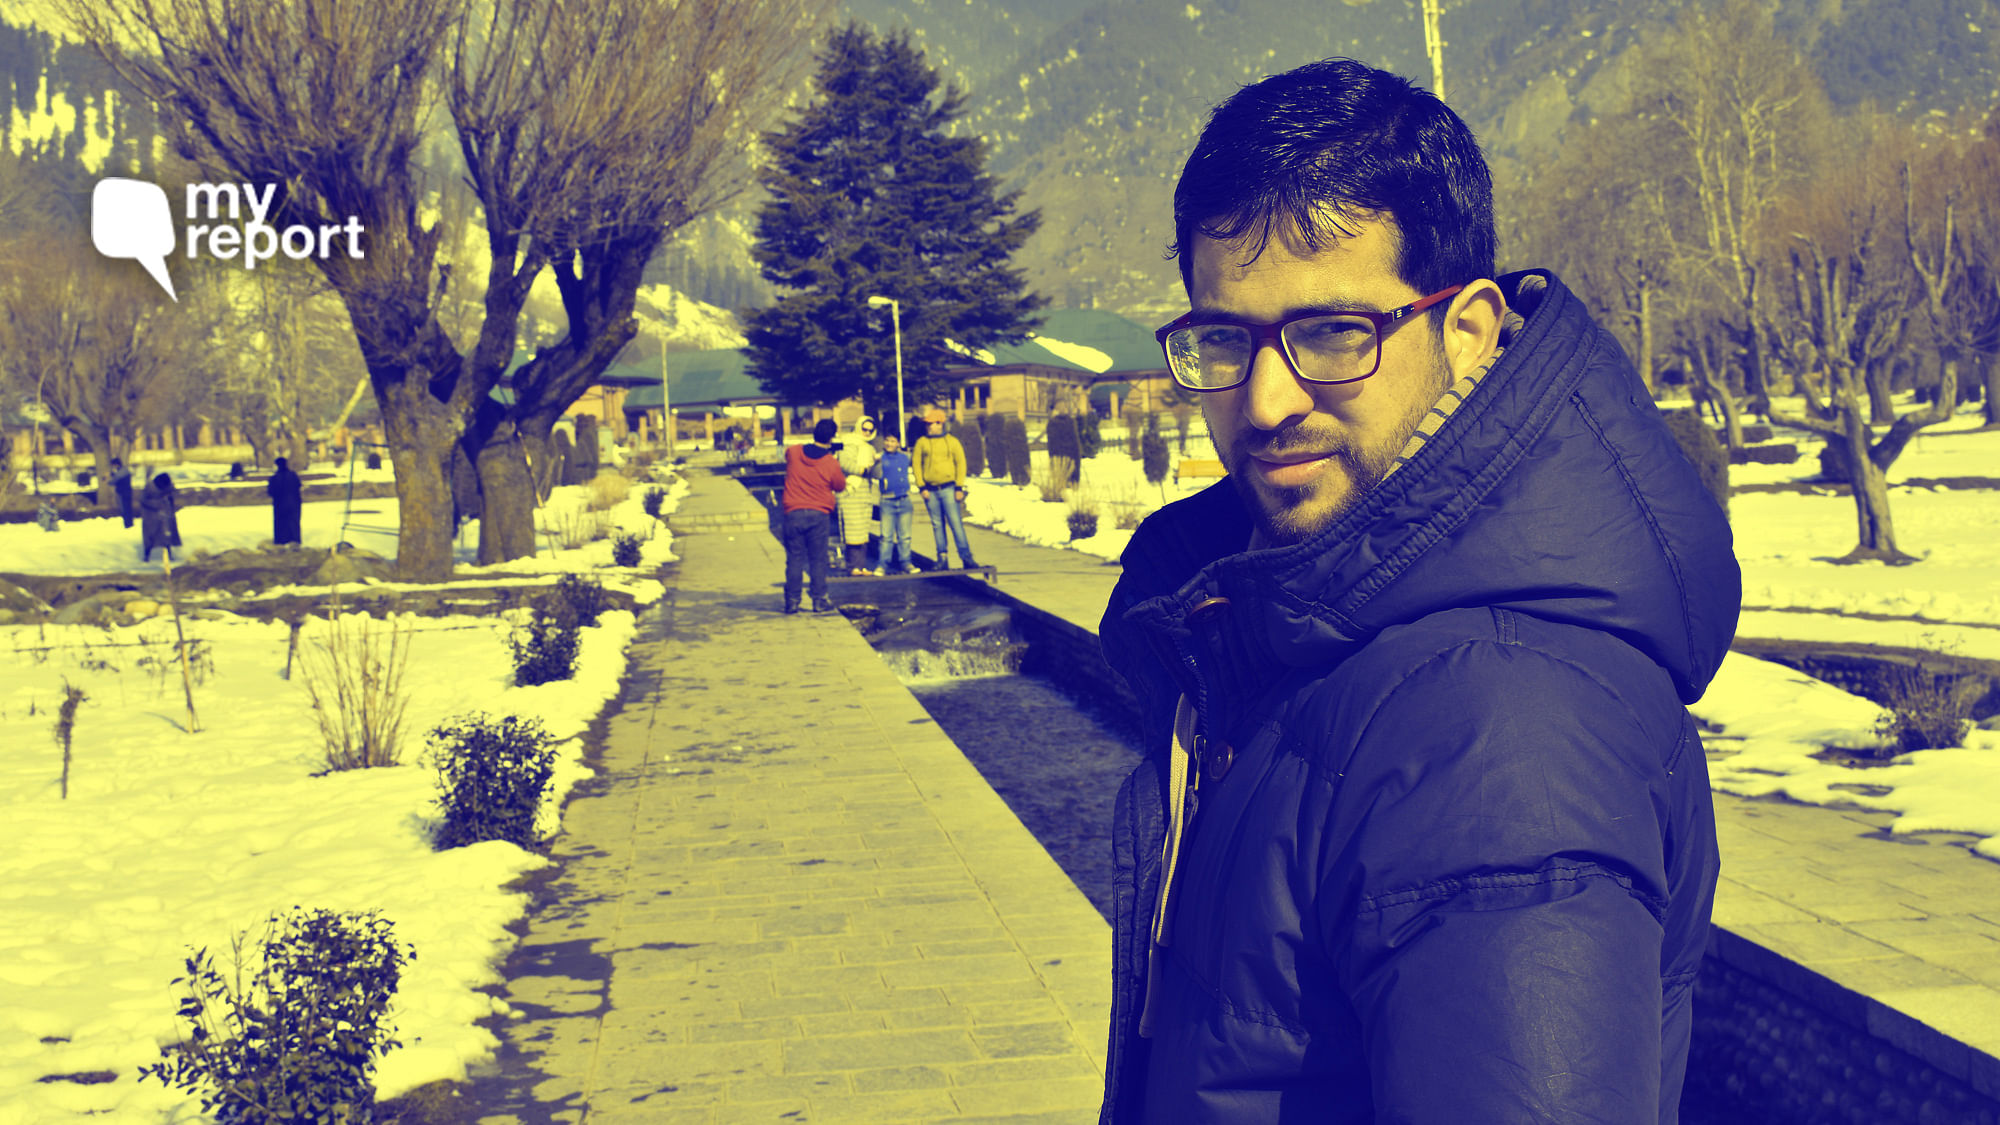 Javeed Ali pens an emotional letter to his fiancee amid the lockdown in Kashmir.&nbsp;